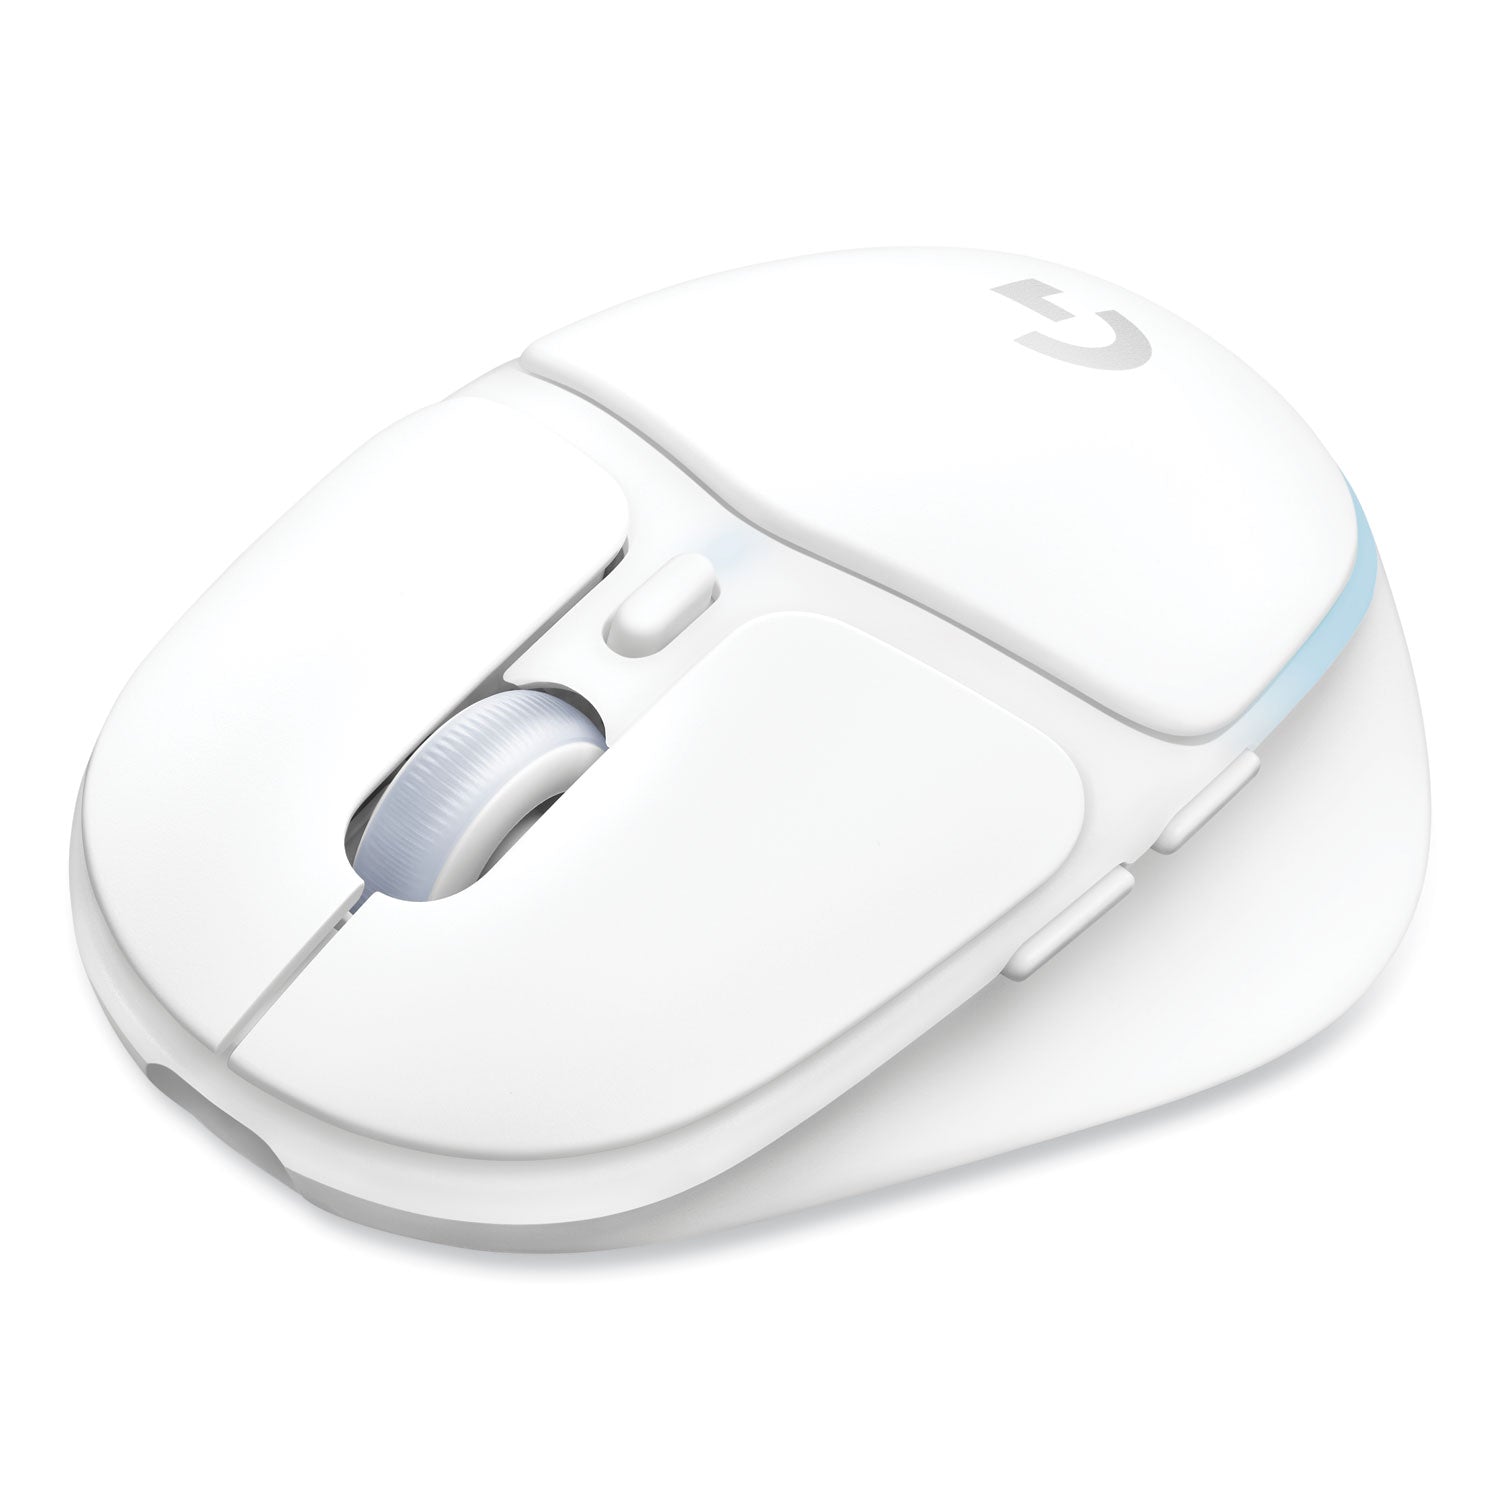 g705-wireless-gaming-mouse-24-ghz-frequency-33-ft-wireless-range-right-hand-use-white_log910006365 - 1